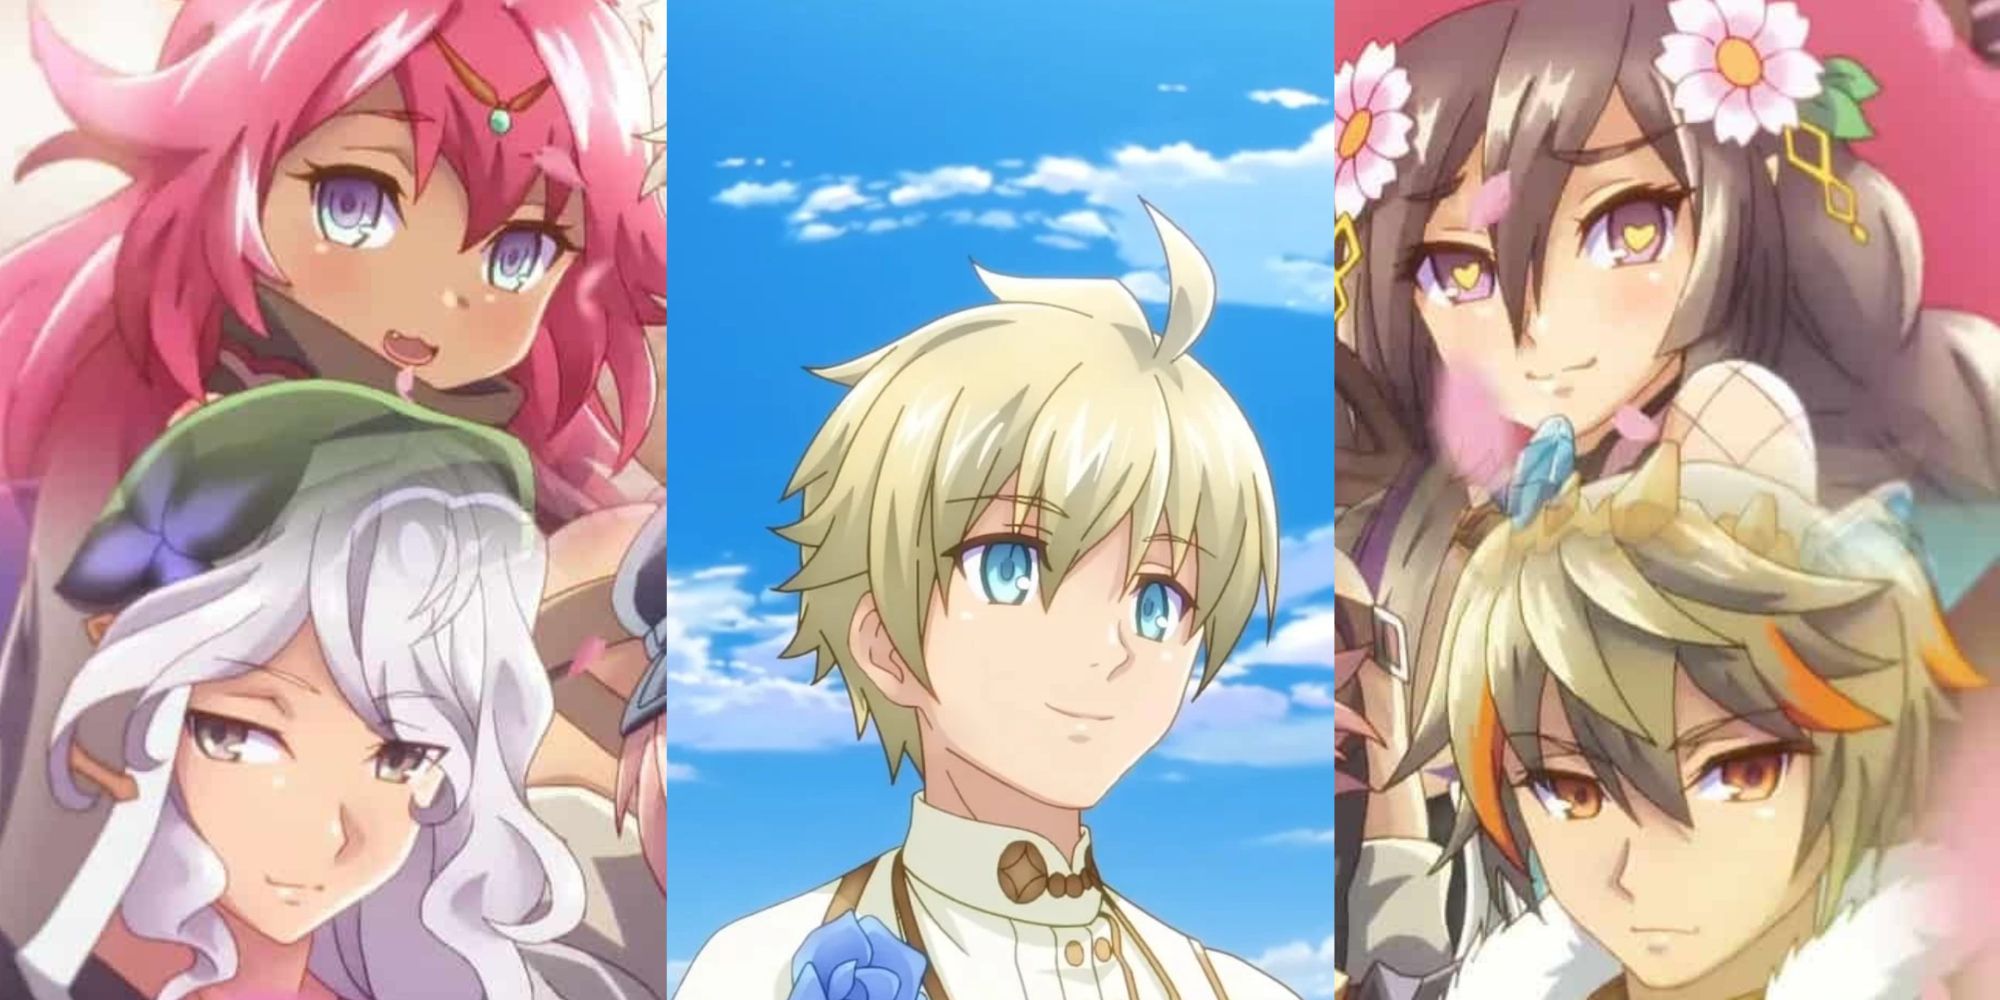 Rune Factory 5 Marraige Candidates with the PC in the middle